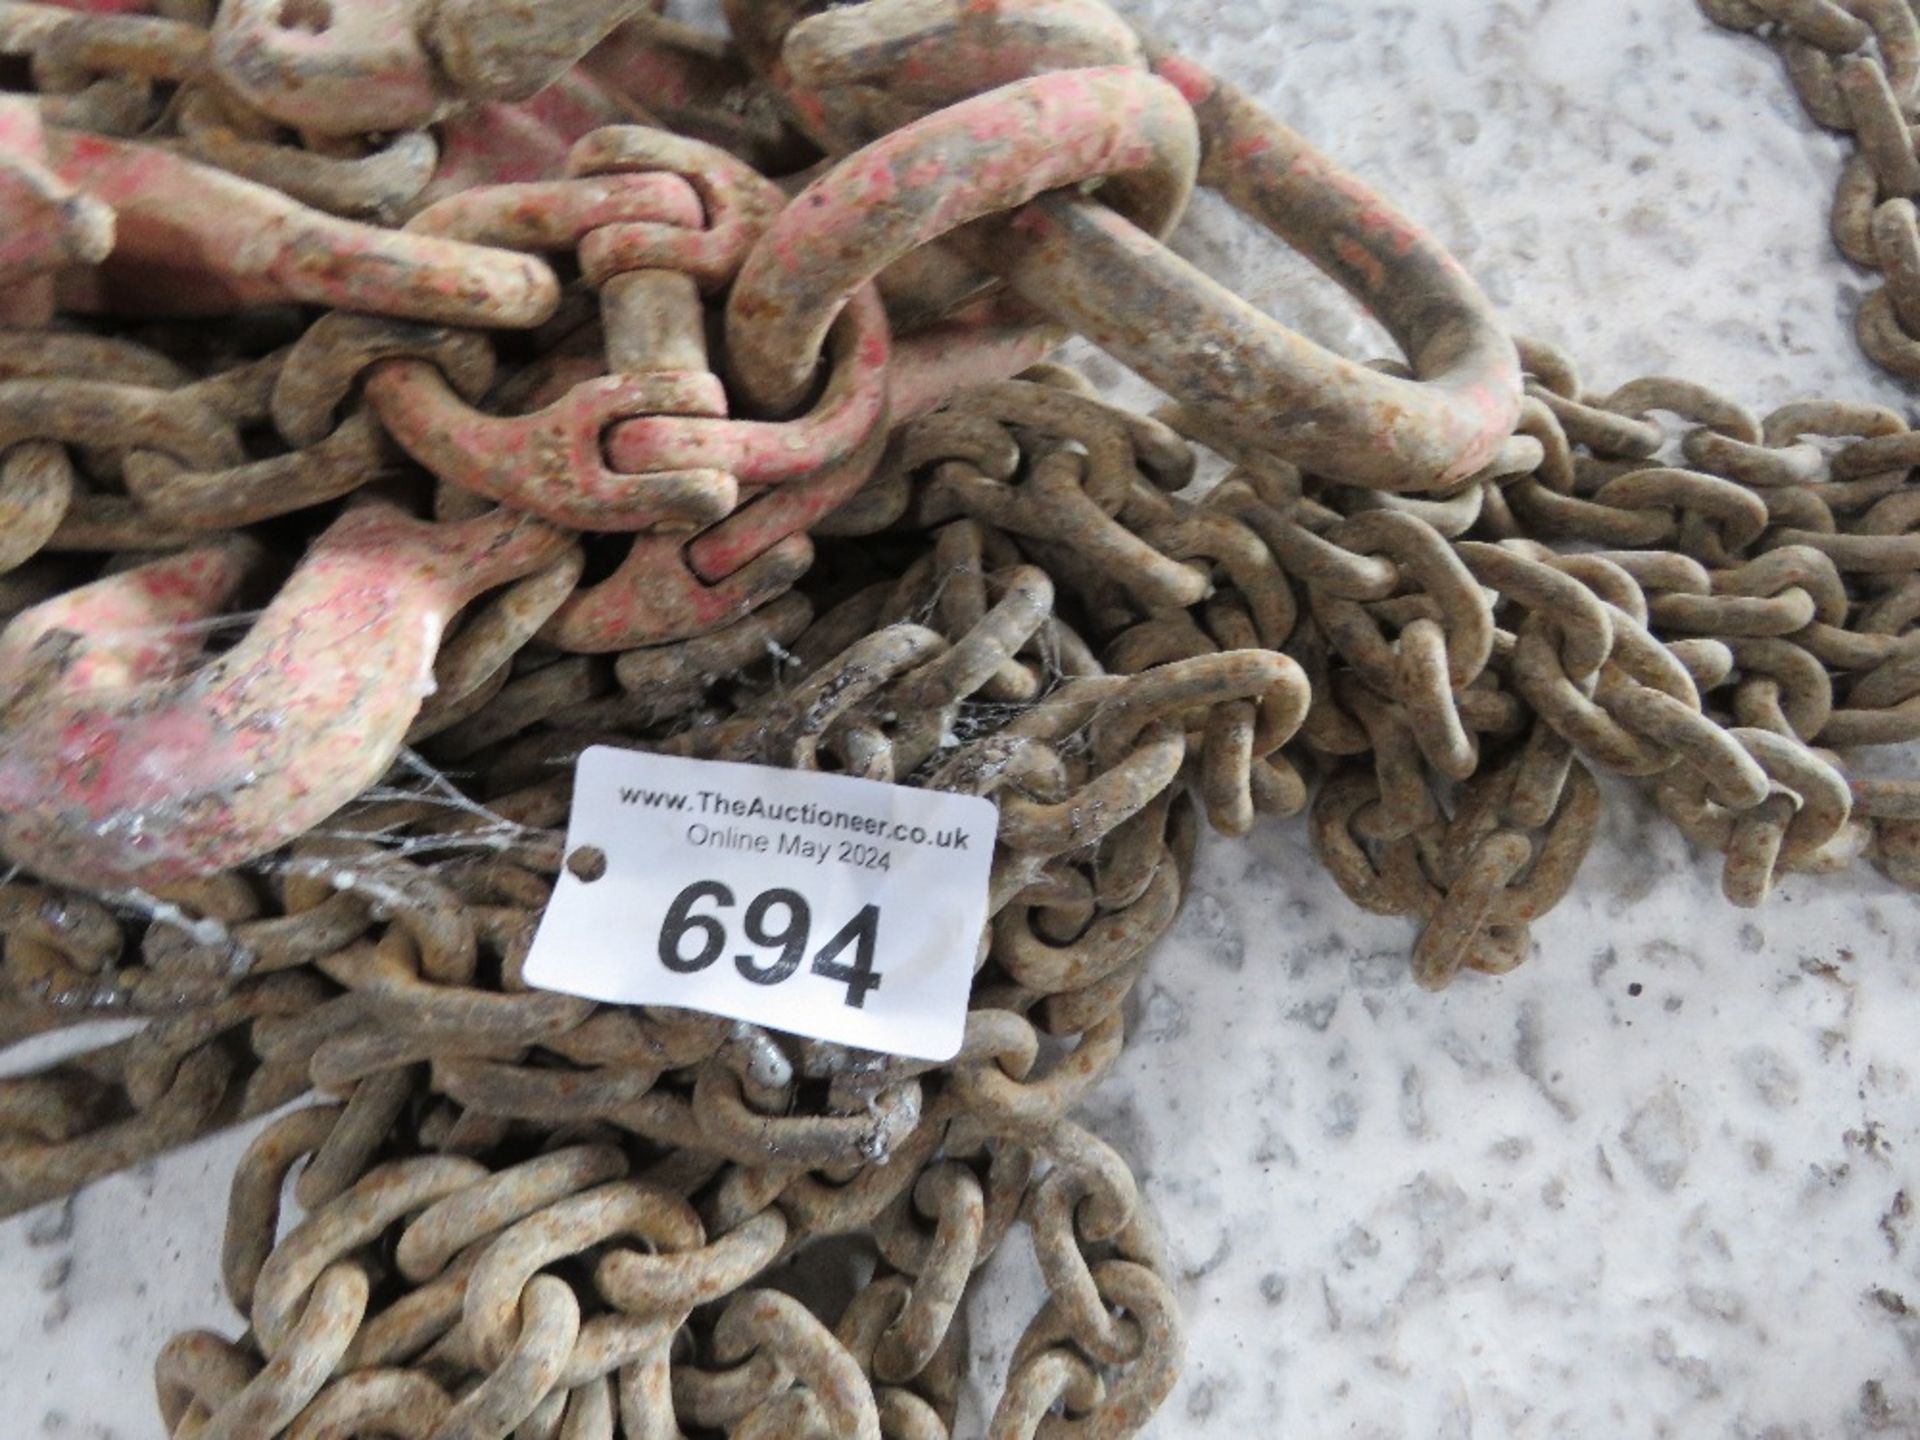 SET OF 4 LEGGED CHAIN BROTHERS WITH SHORTENERS, 8FT LENGTH APPROX.....THIS LOT IS SOLD UNDER THE AUC - Image 2 of 2